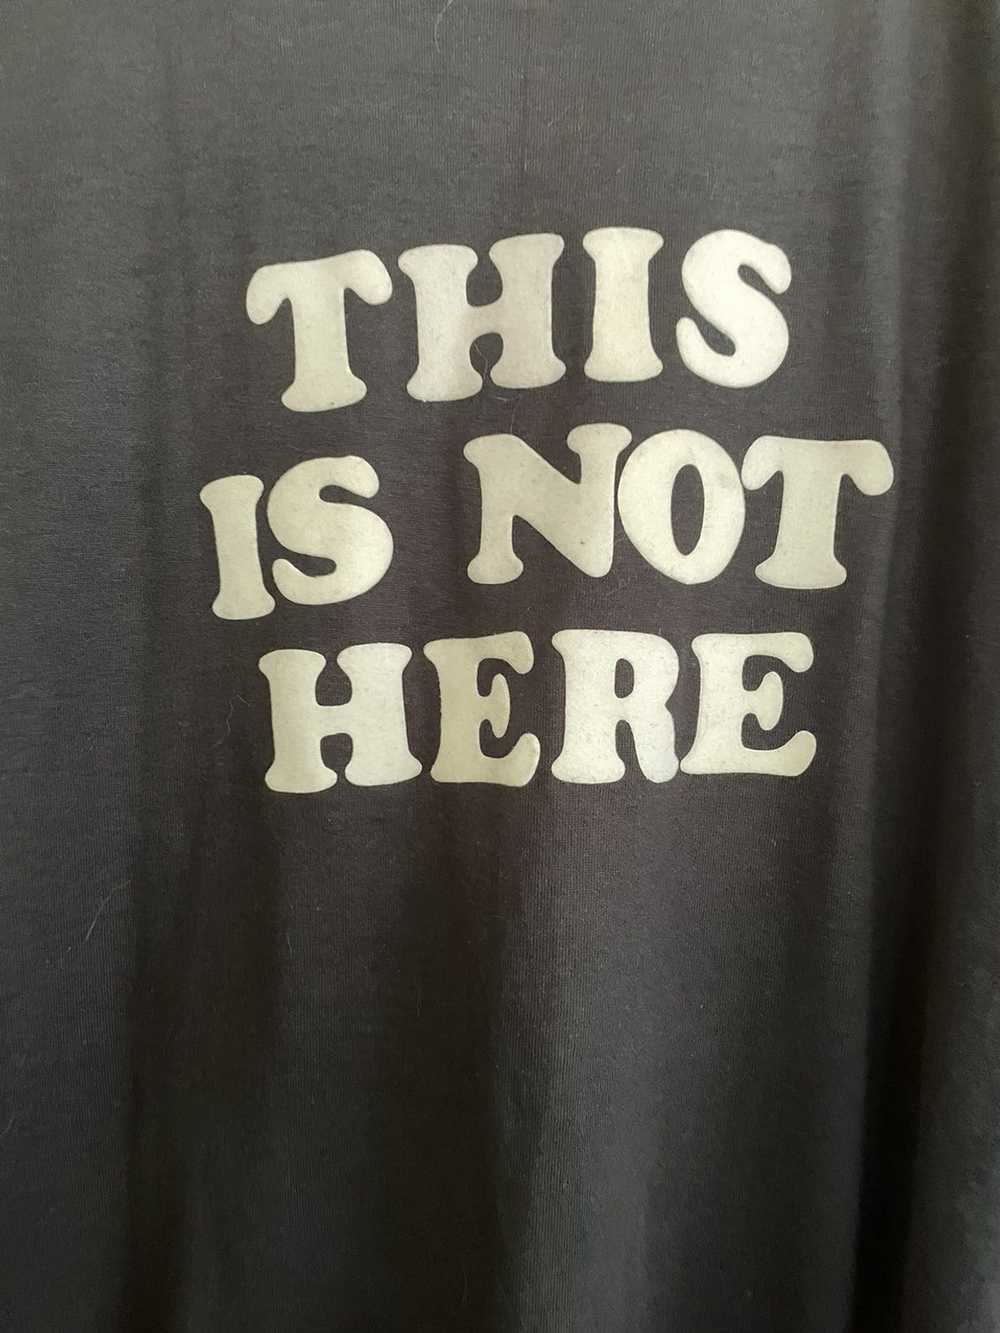 Vintage Vintage John Lennon “THIS IS NOT HERE” - image 2